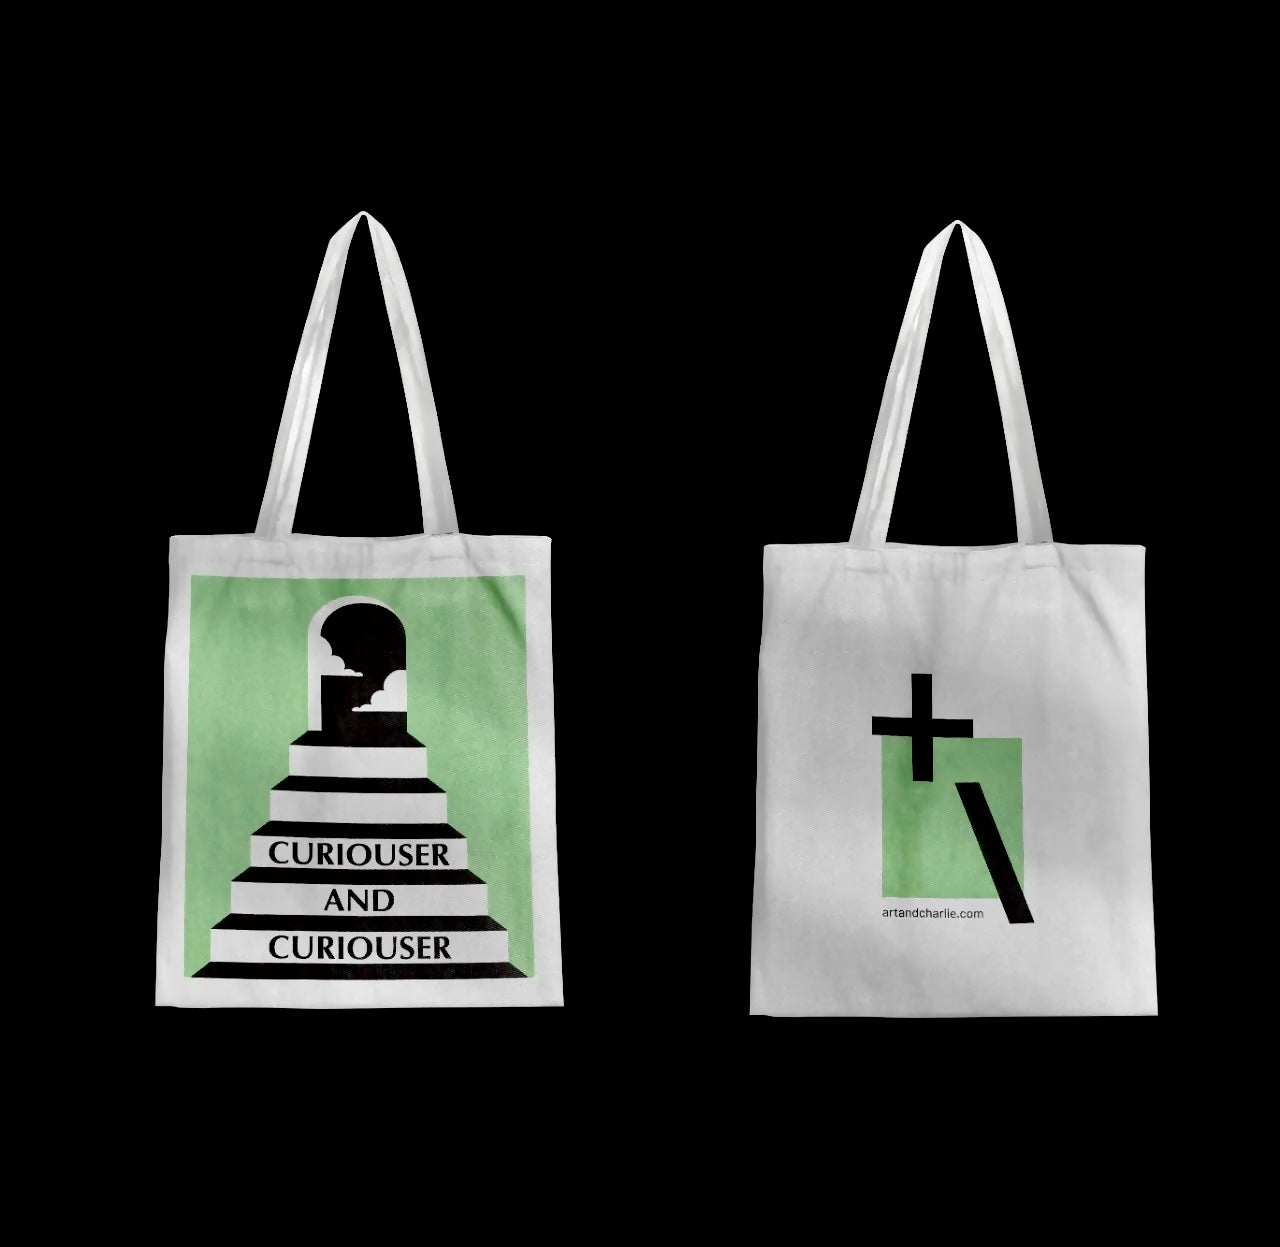 Curiouser and Curiouser' totebag by Art and Charie